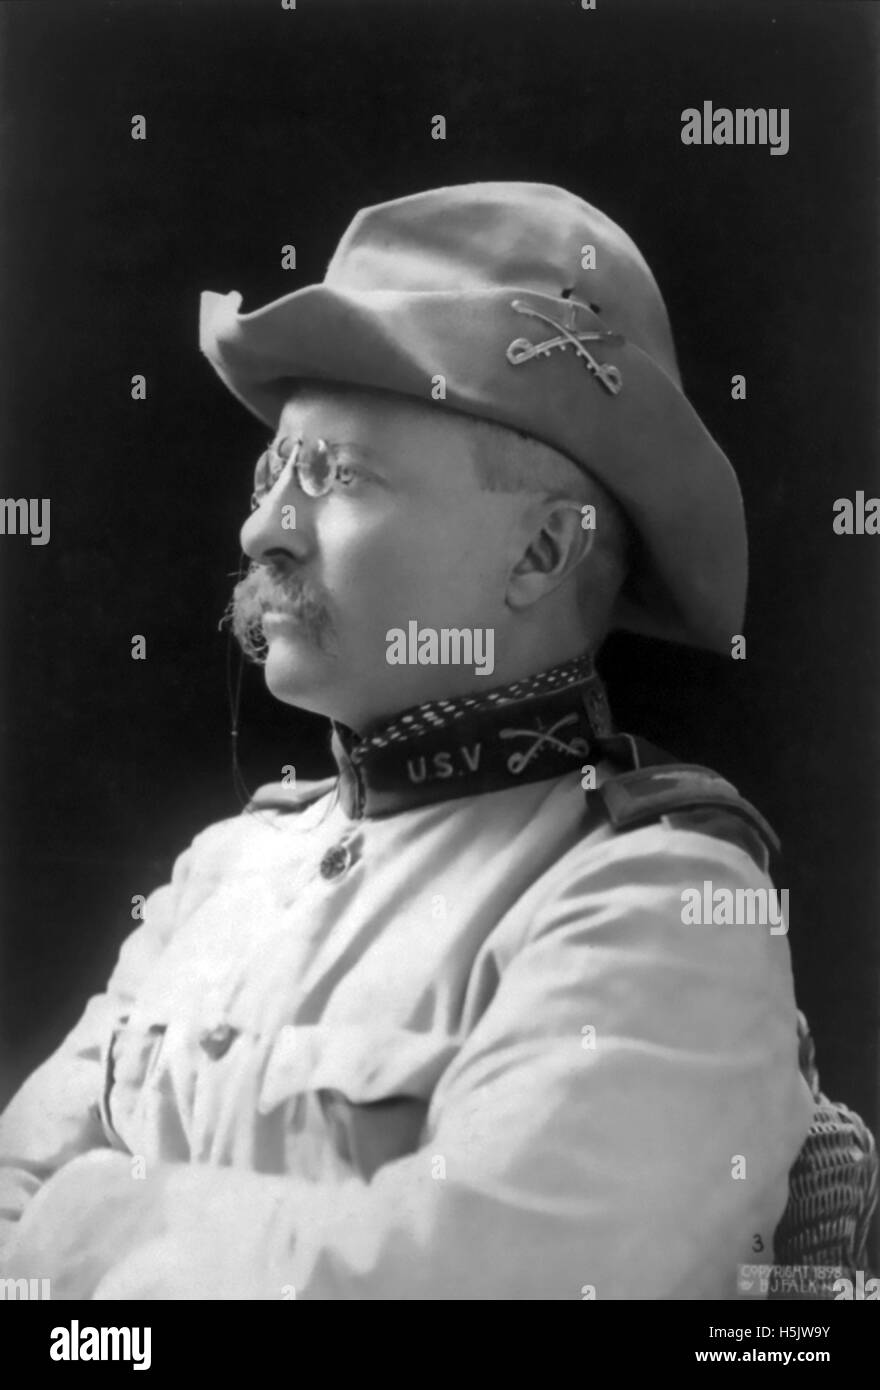 THEODORE ROOSEVELT (1858-1919) American politician as a a Captain in the First US Volunteer Cavalry Regiment in 1898 Stock Photo